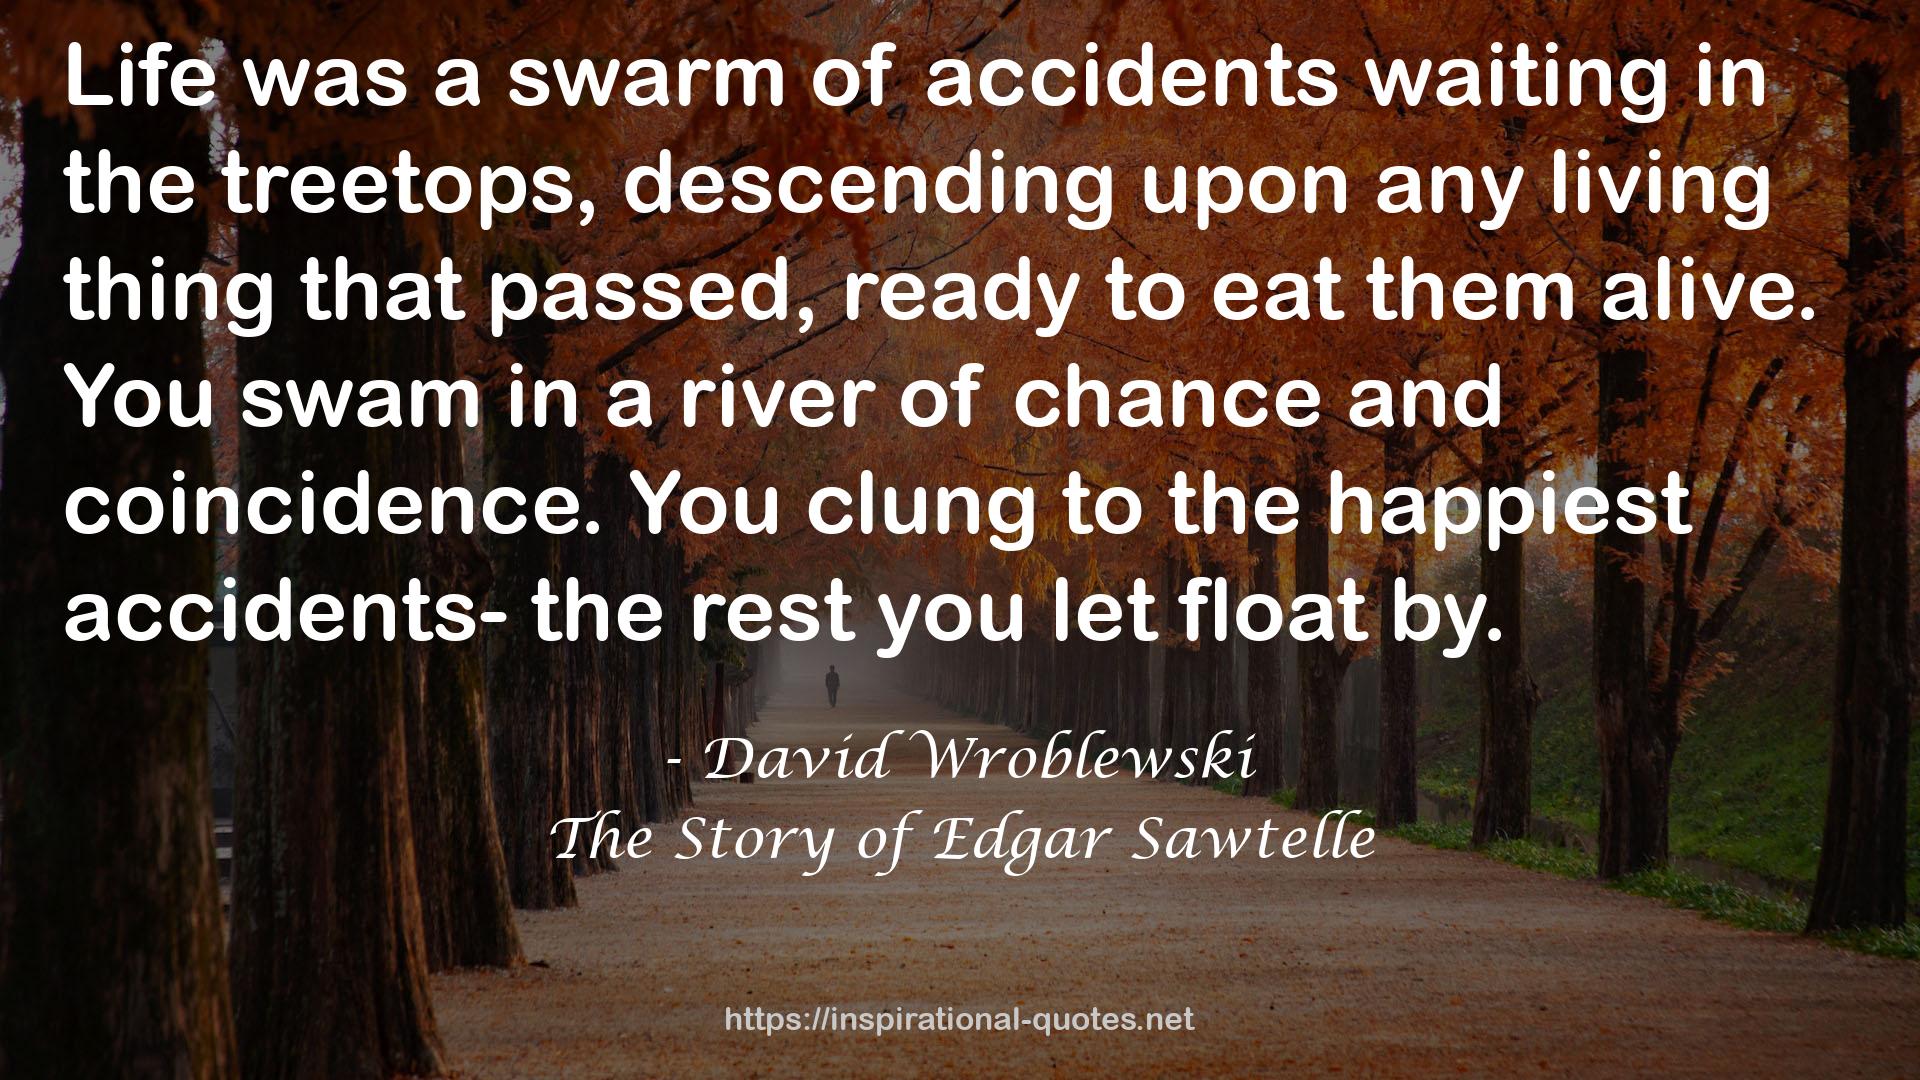 The Story of Edgar Sawtelle QUOTES